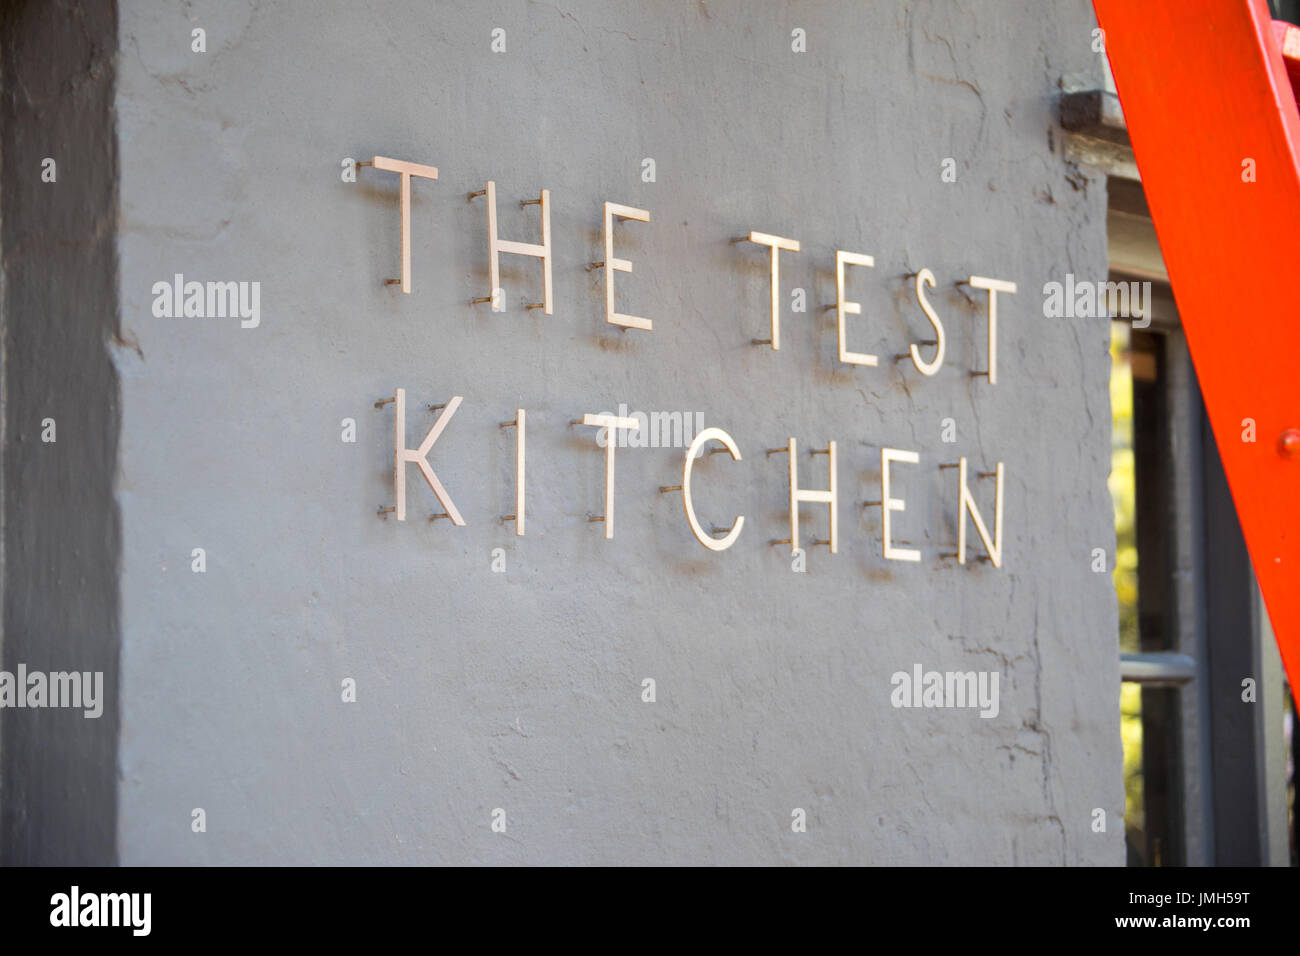 TTK, The Test Kitchen at The Old Biscuit Mill, Cape Town, South Africa Stock Photo